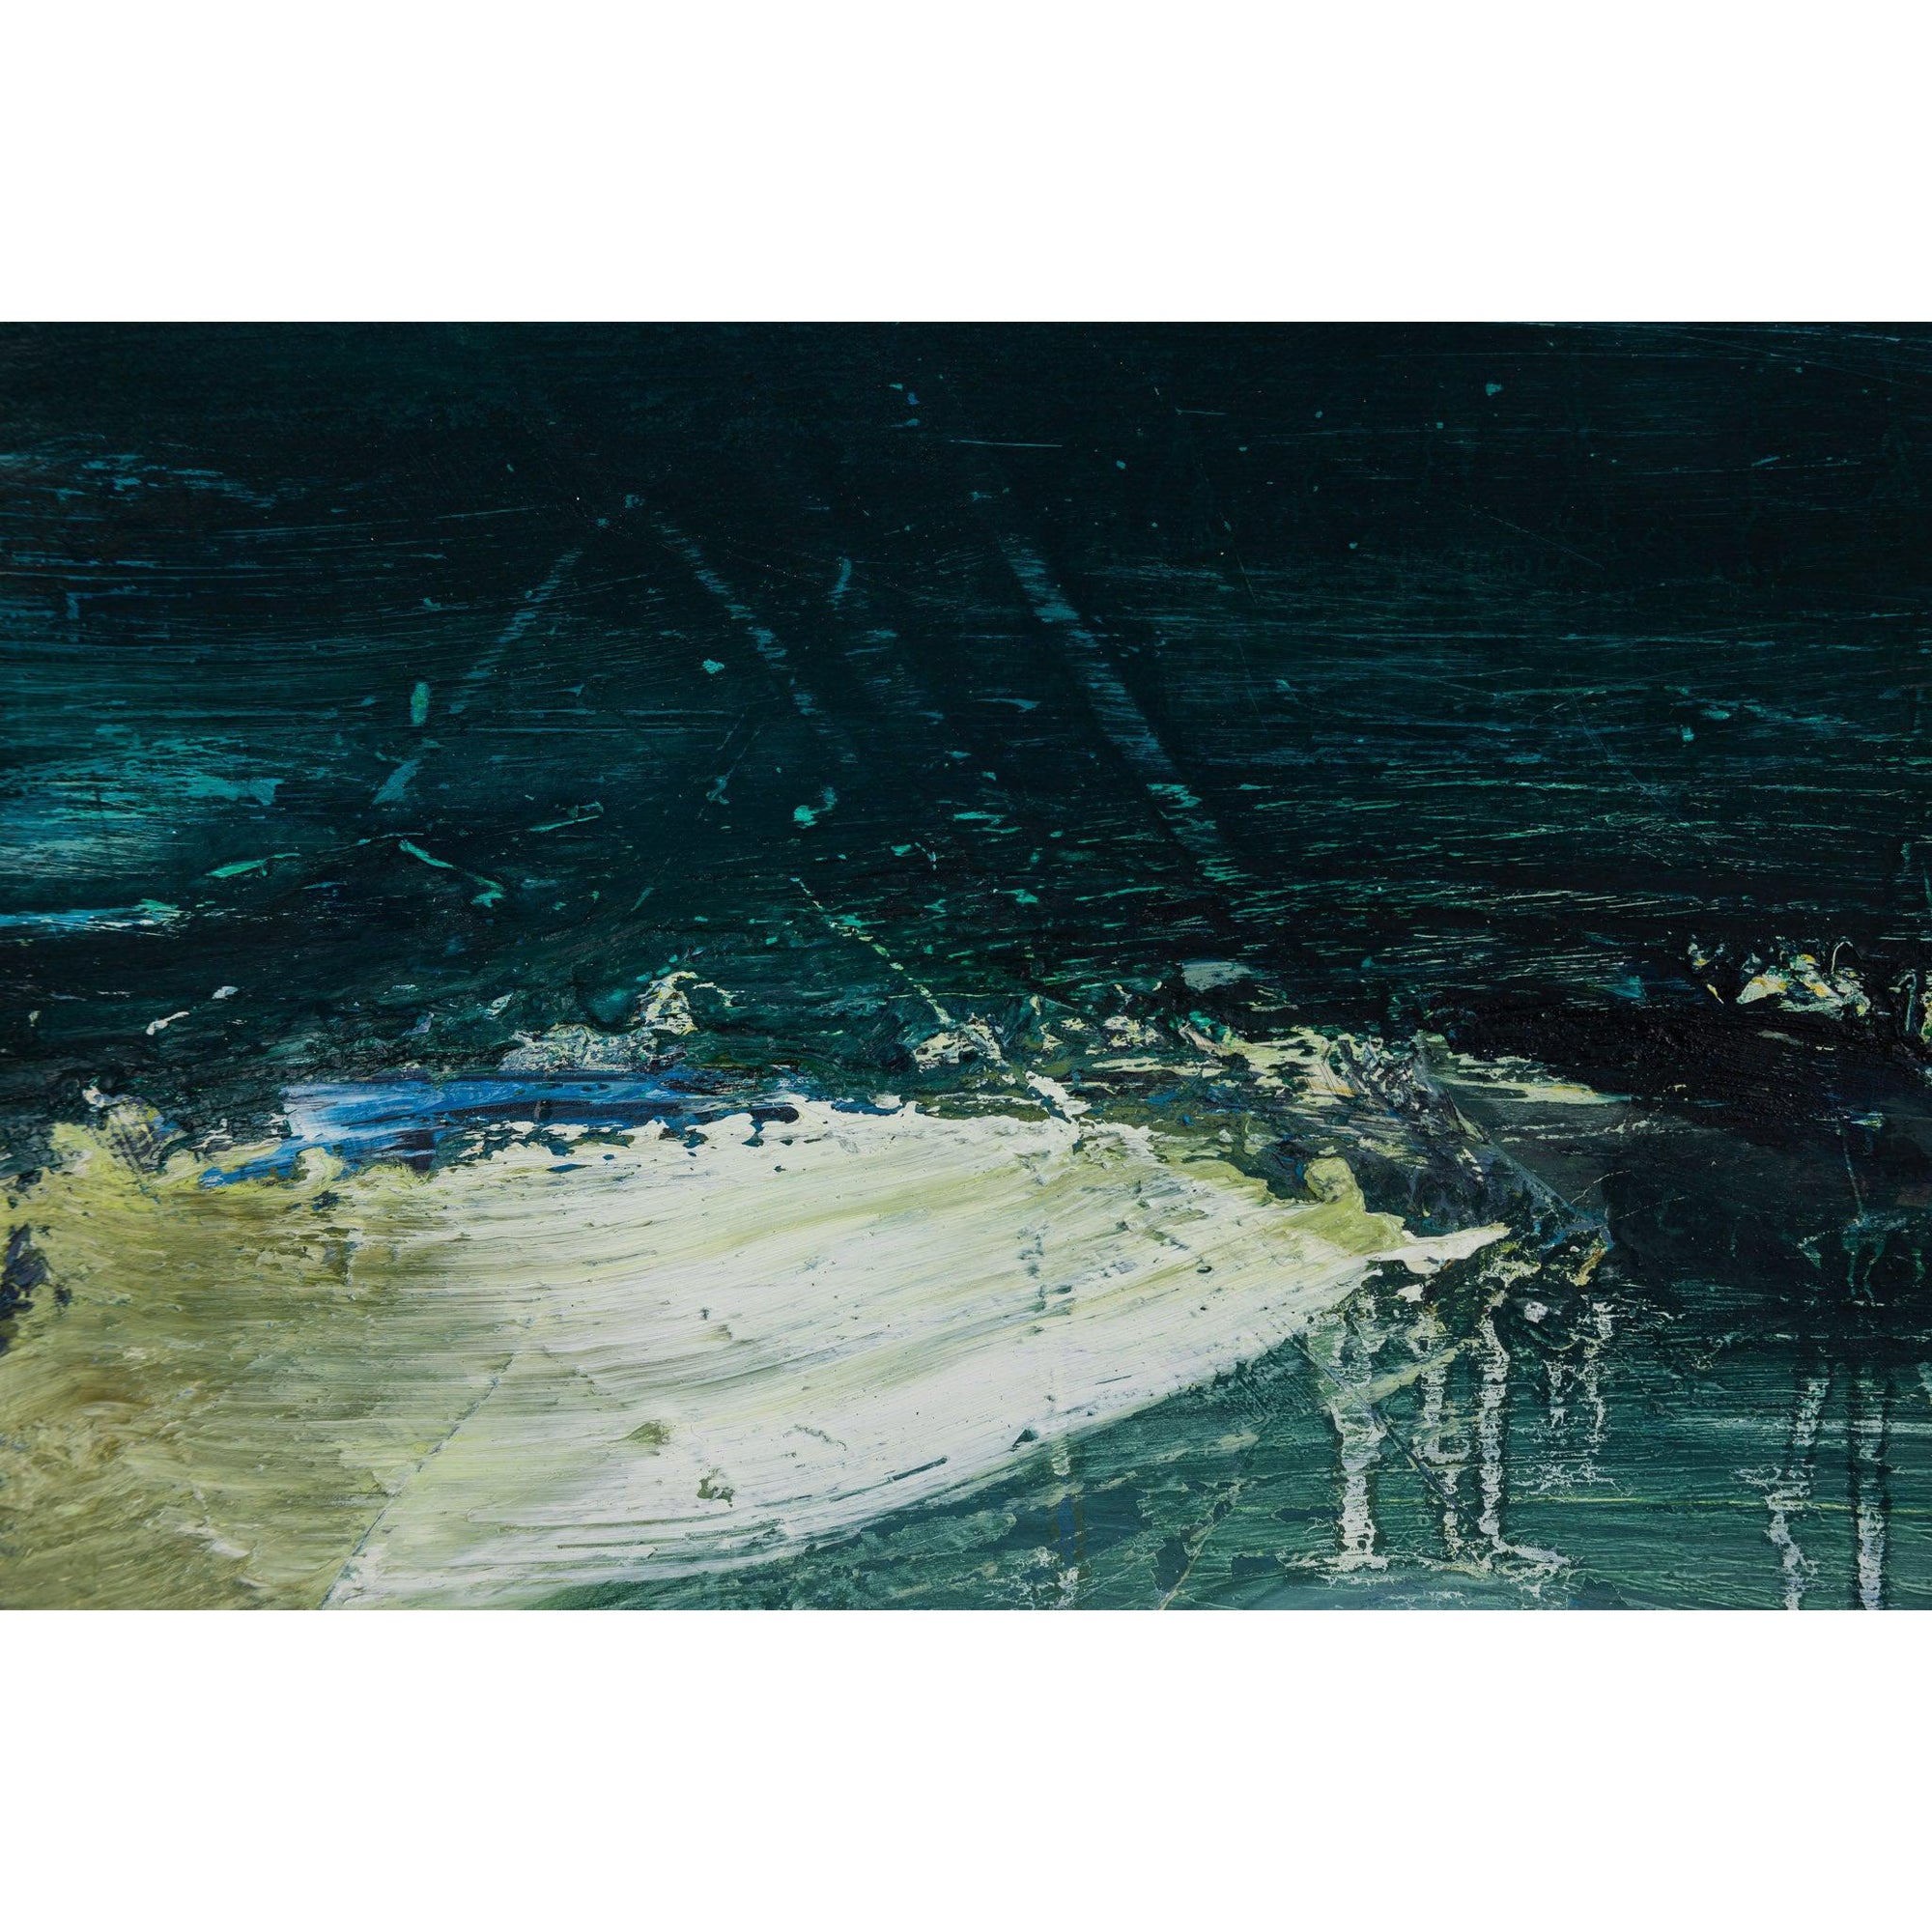 'Emerald Coastal' oil original by Justine Lois Thorpe, available at Padstow Gallery, Cornwall